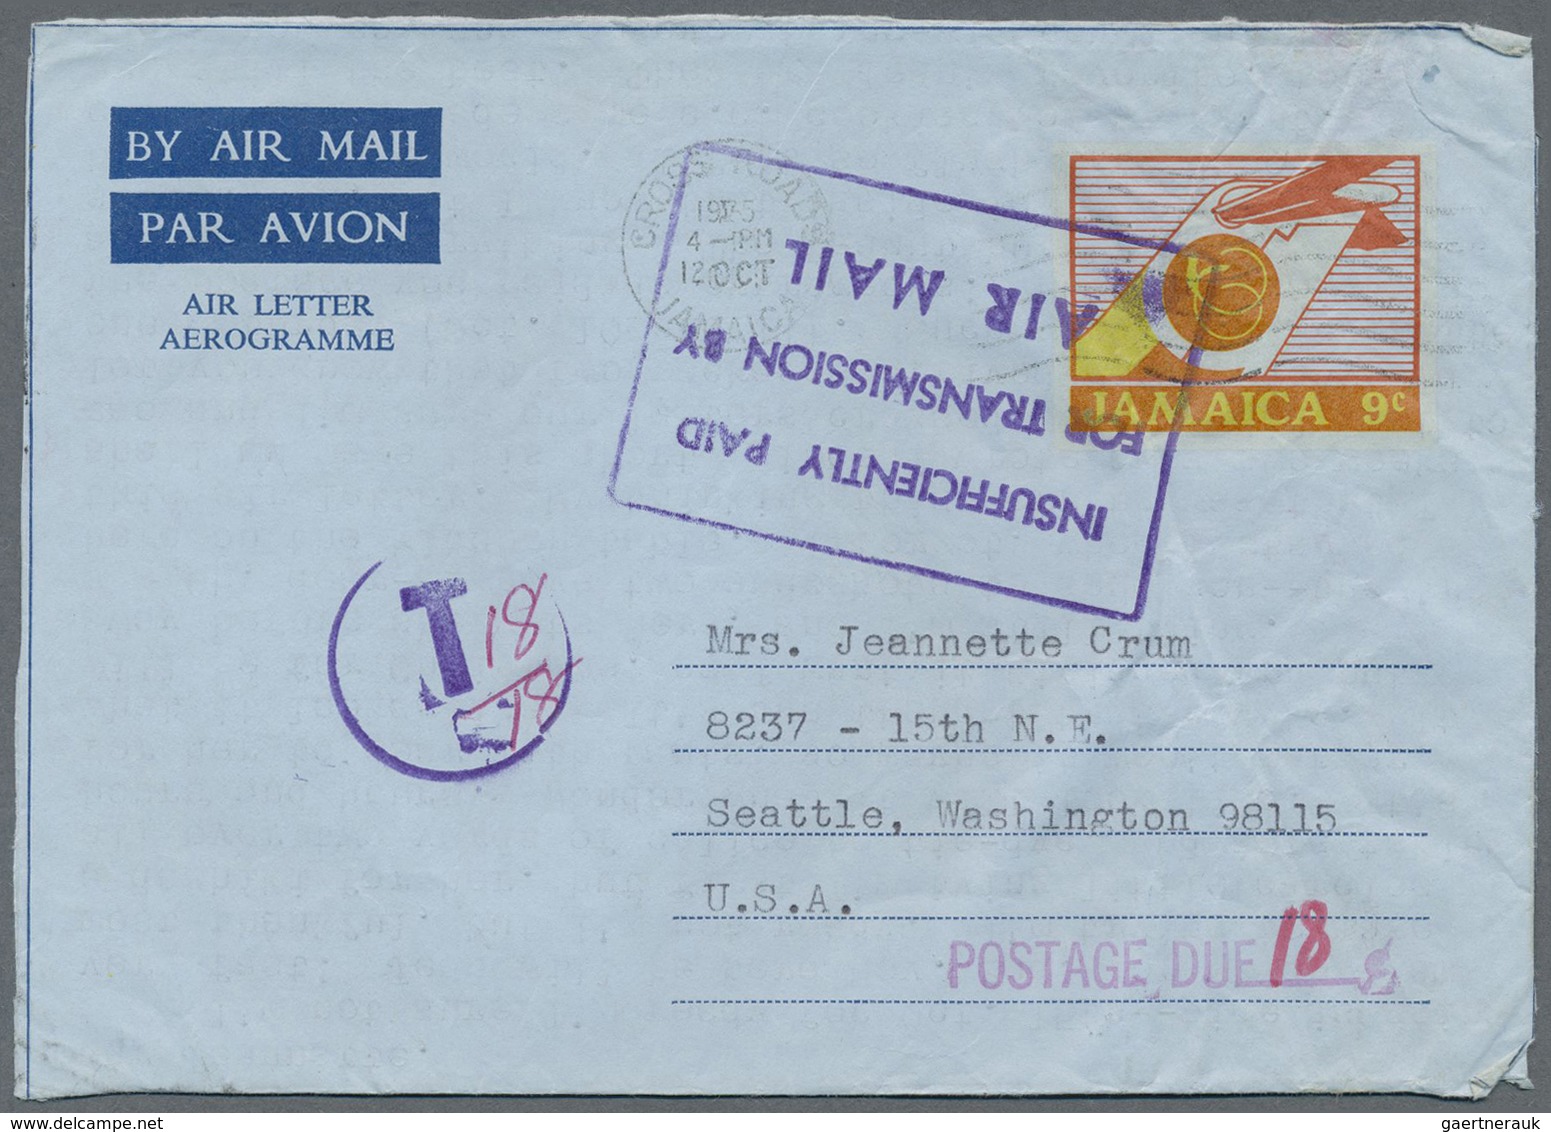 GA Jamaica: 1947/1983 (ca.), AEROGRAMMES: accumulation with approx. 1.000 unused and used/CTO airletter